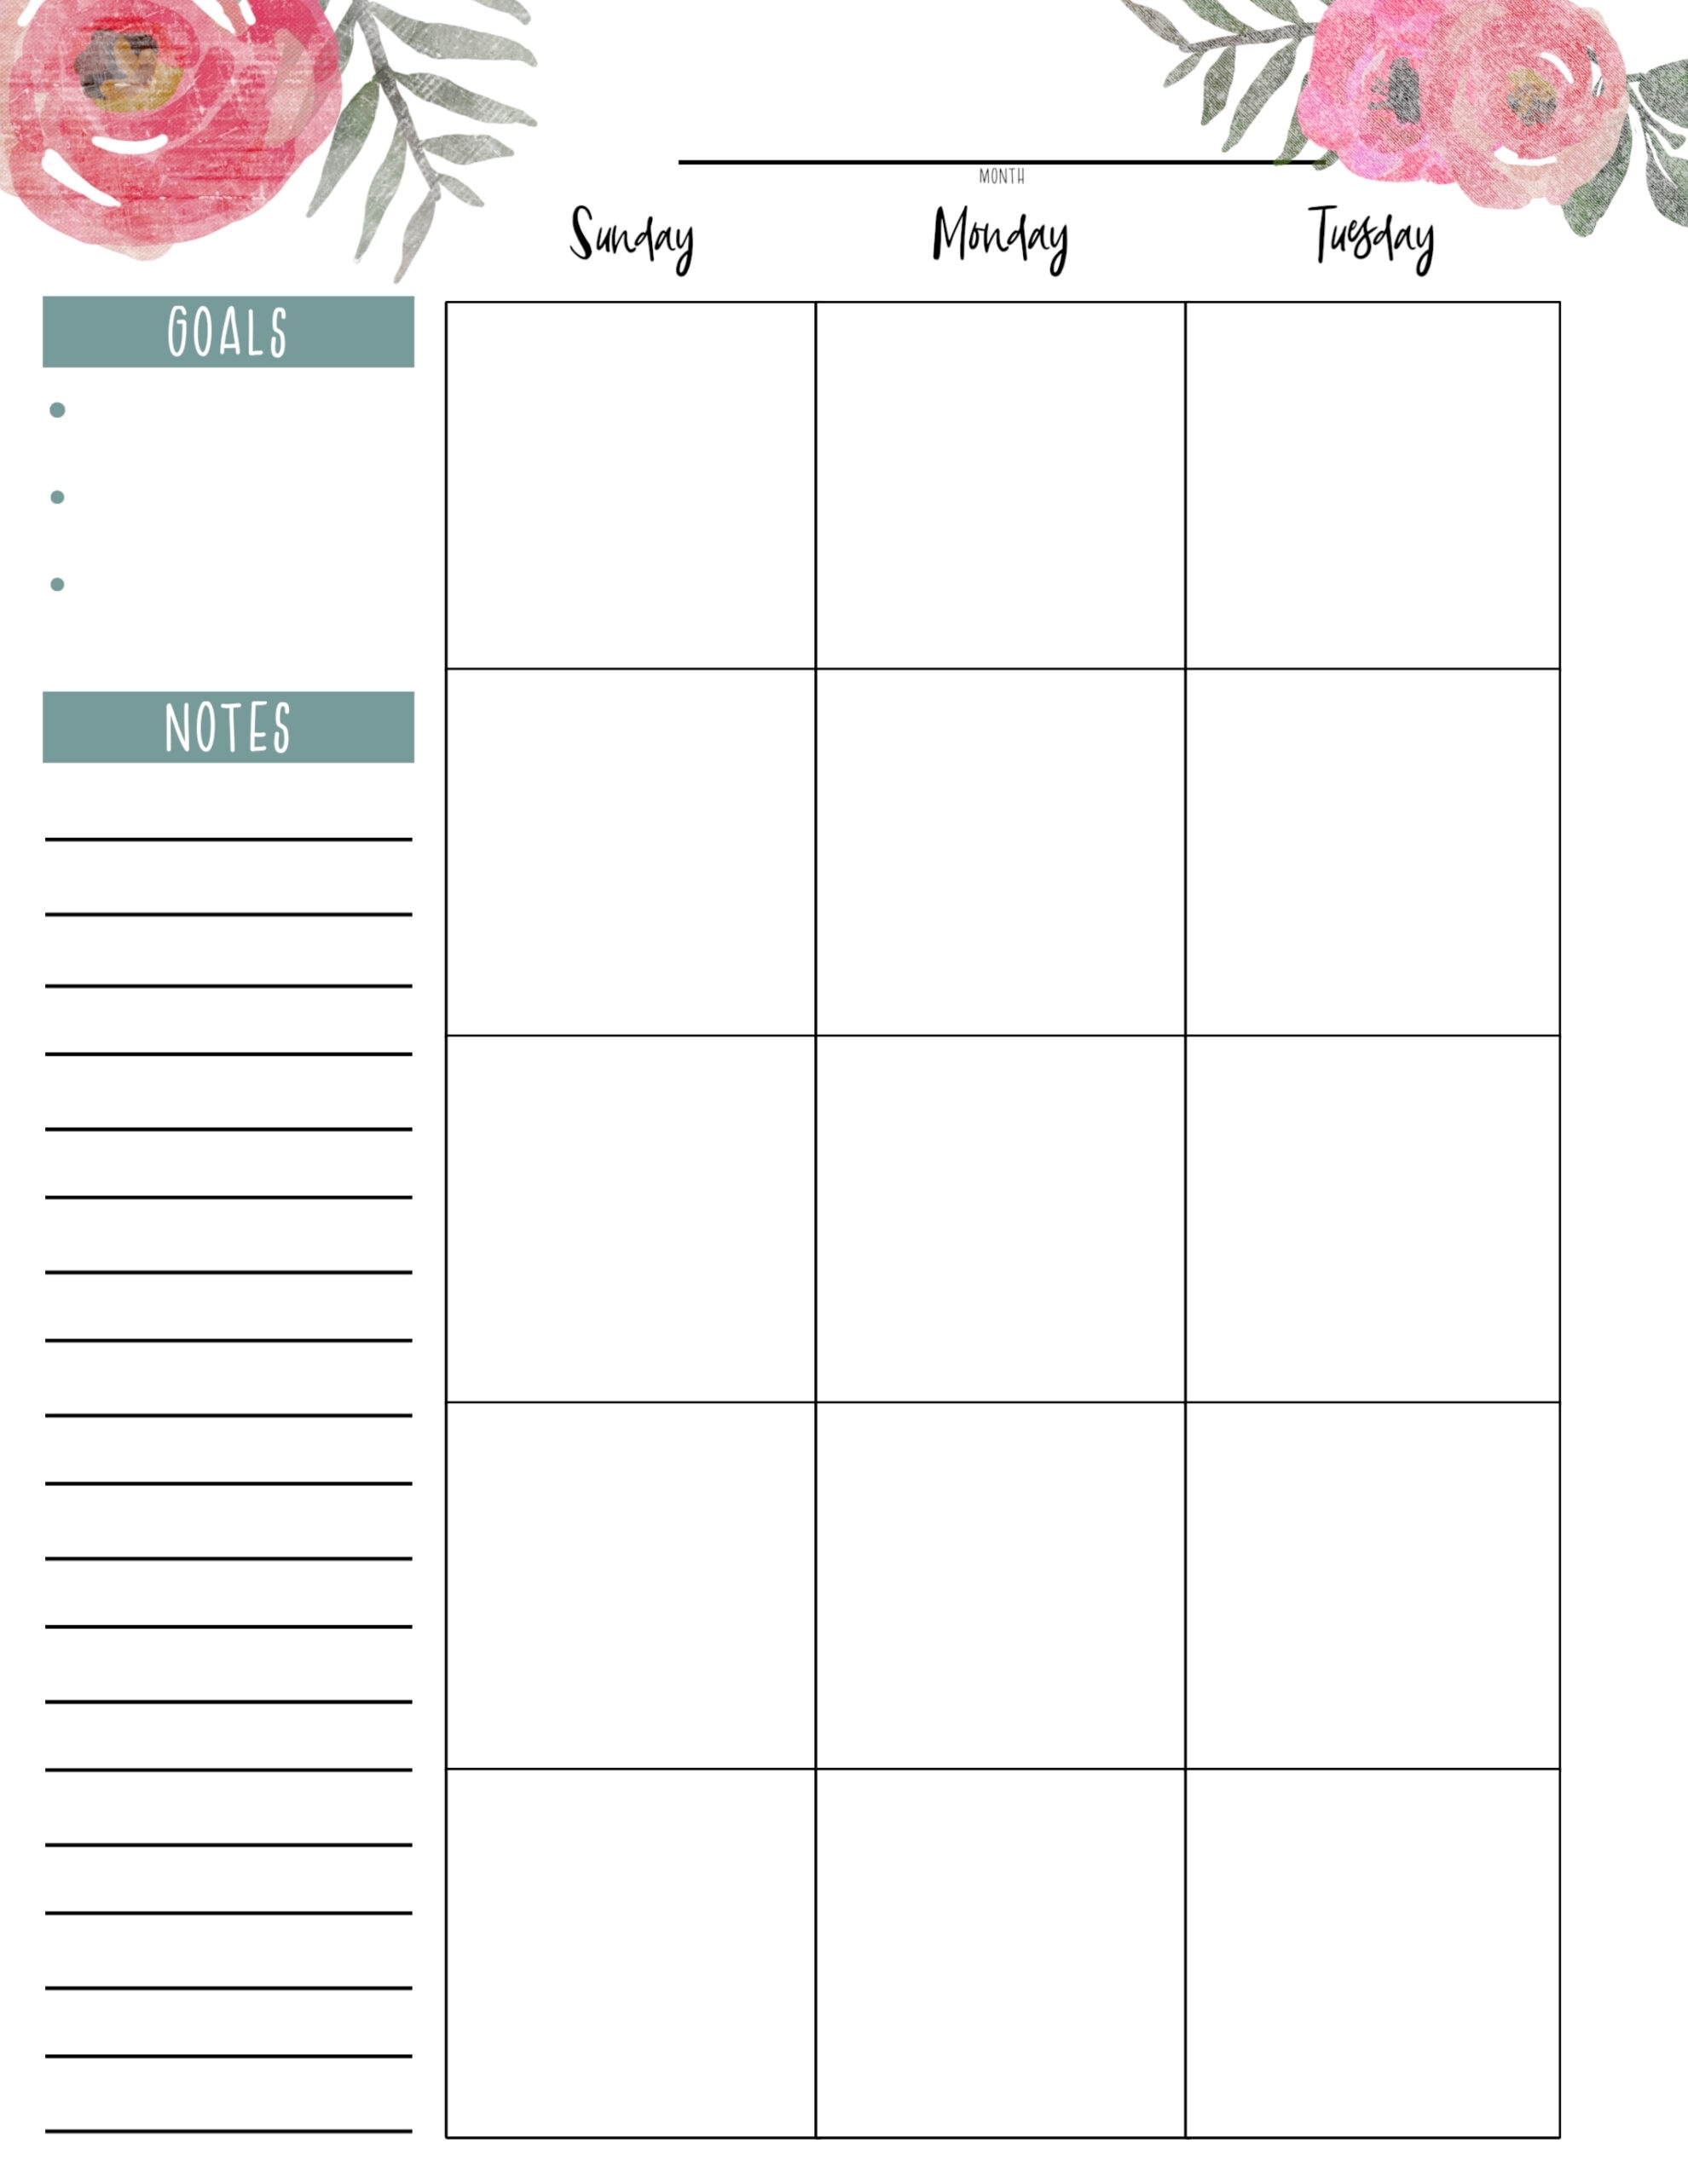 Happy Planner Free Printable Pages - Floral | Paper Trail Design Calendar Template In Pages